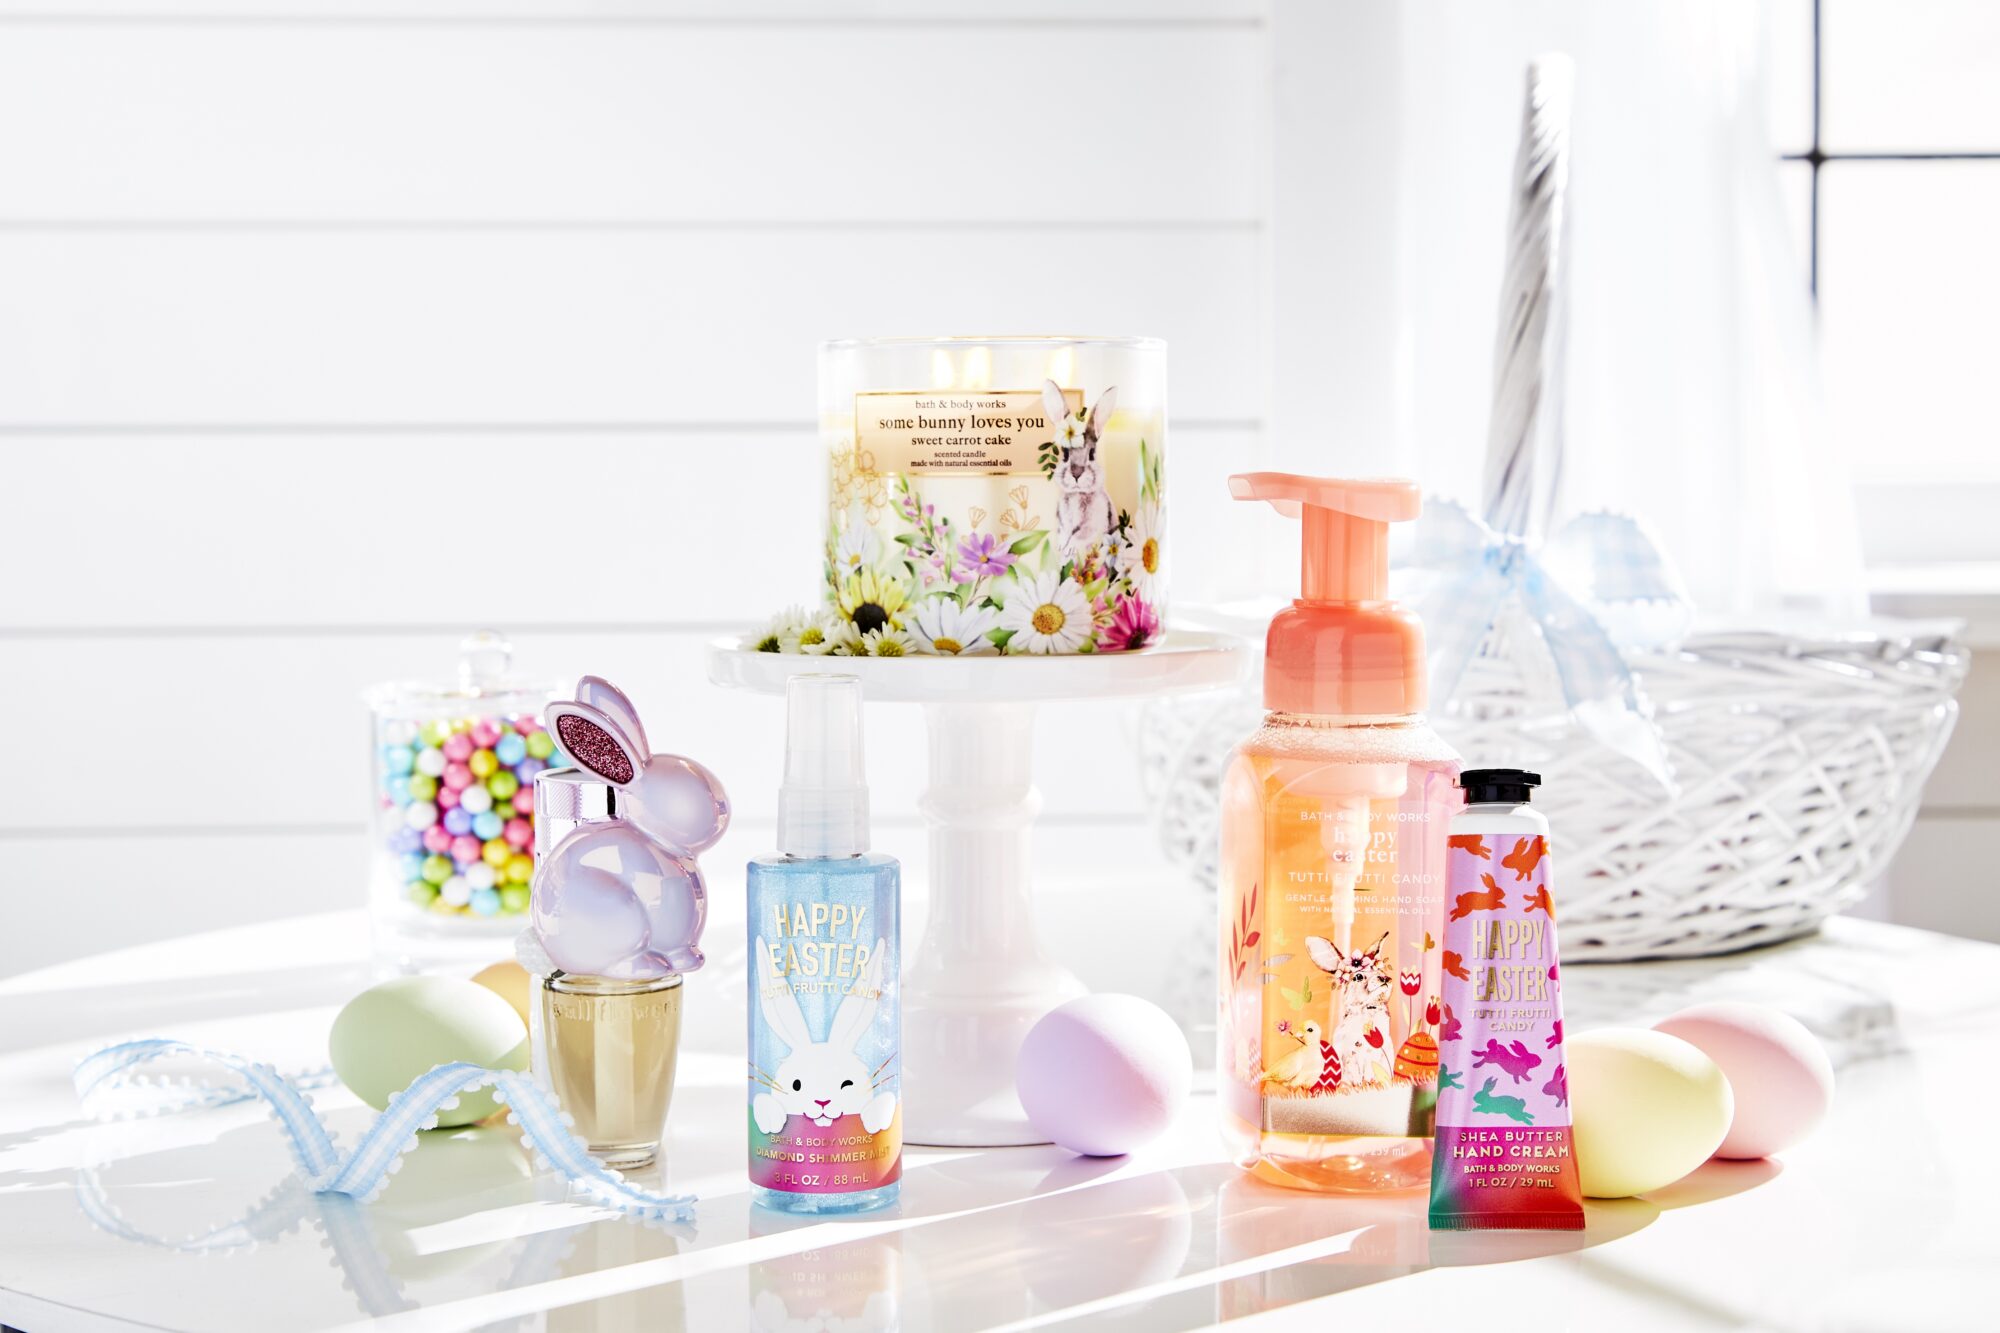 Bath & Body Works Just Dropped Their Easter Collection and I Want It All